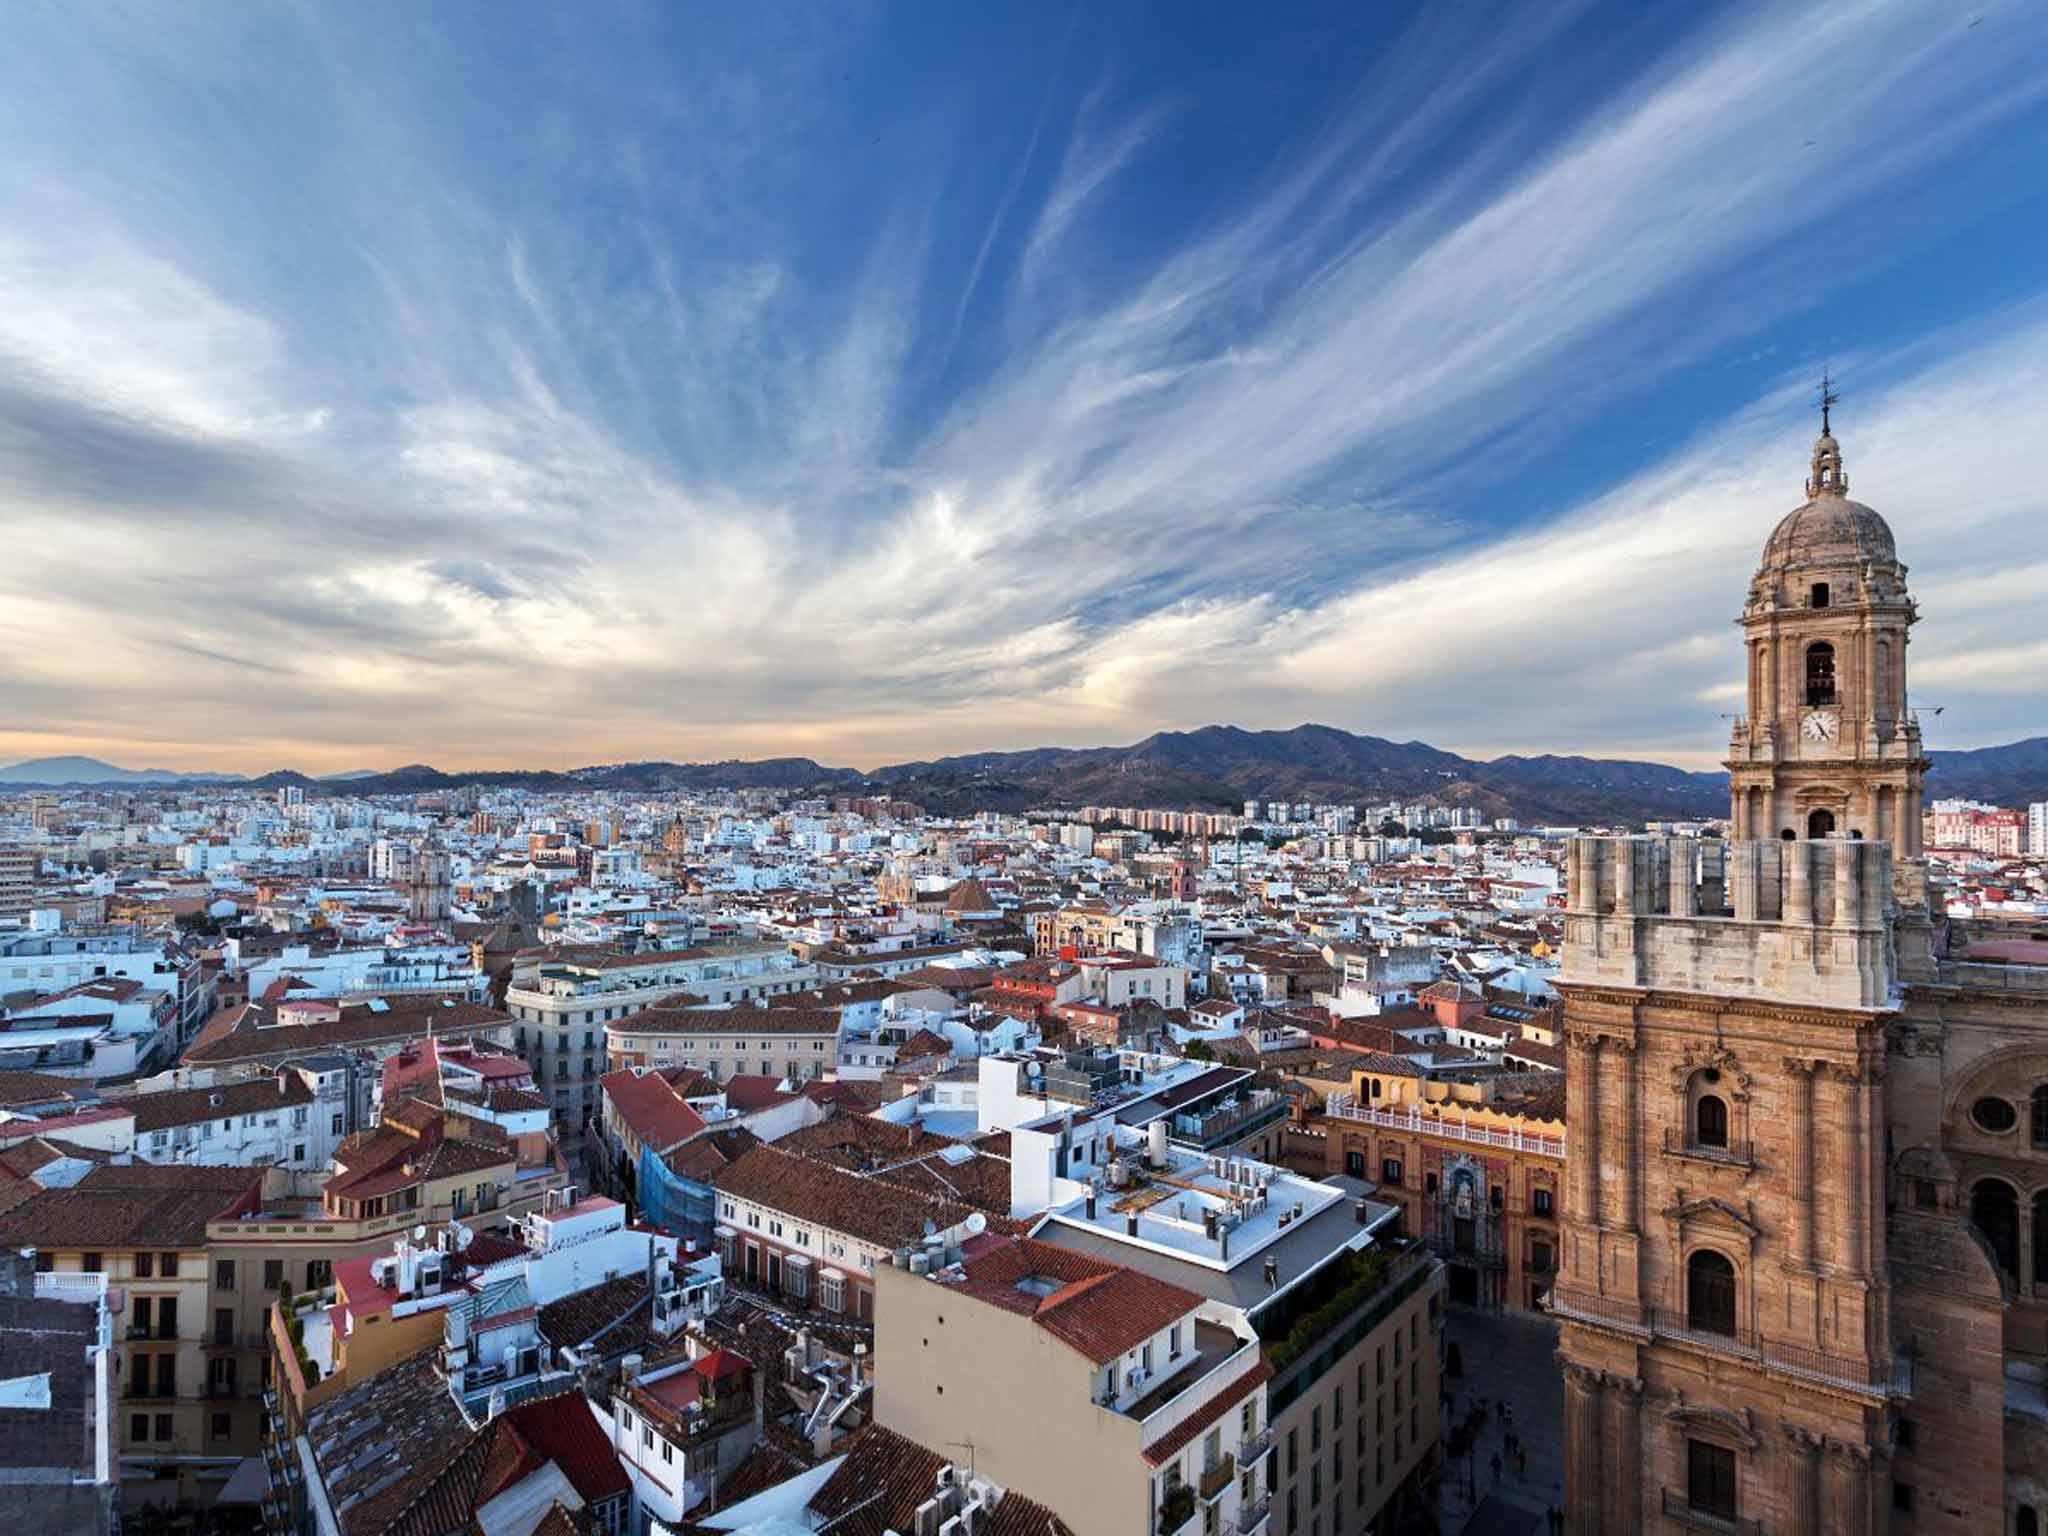 Old town: Malaga dates back almost two millennia